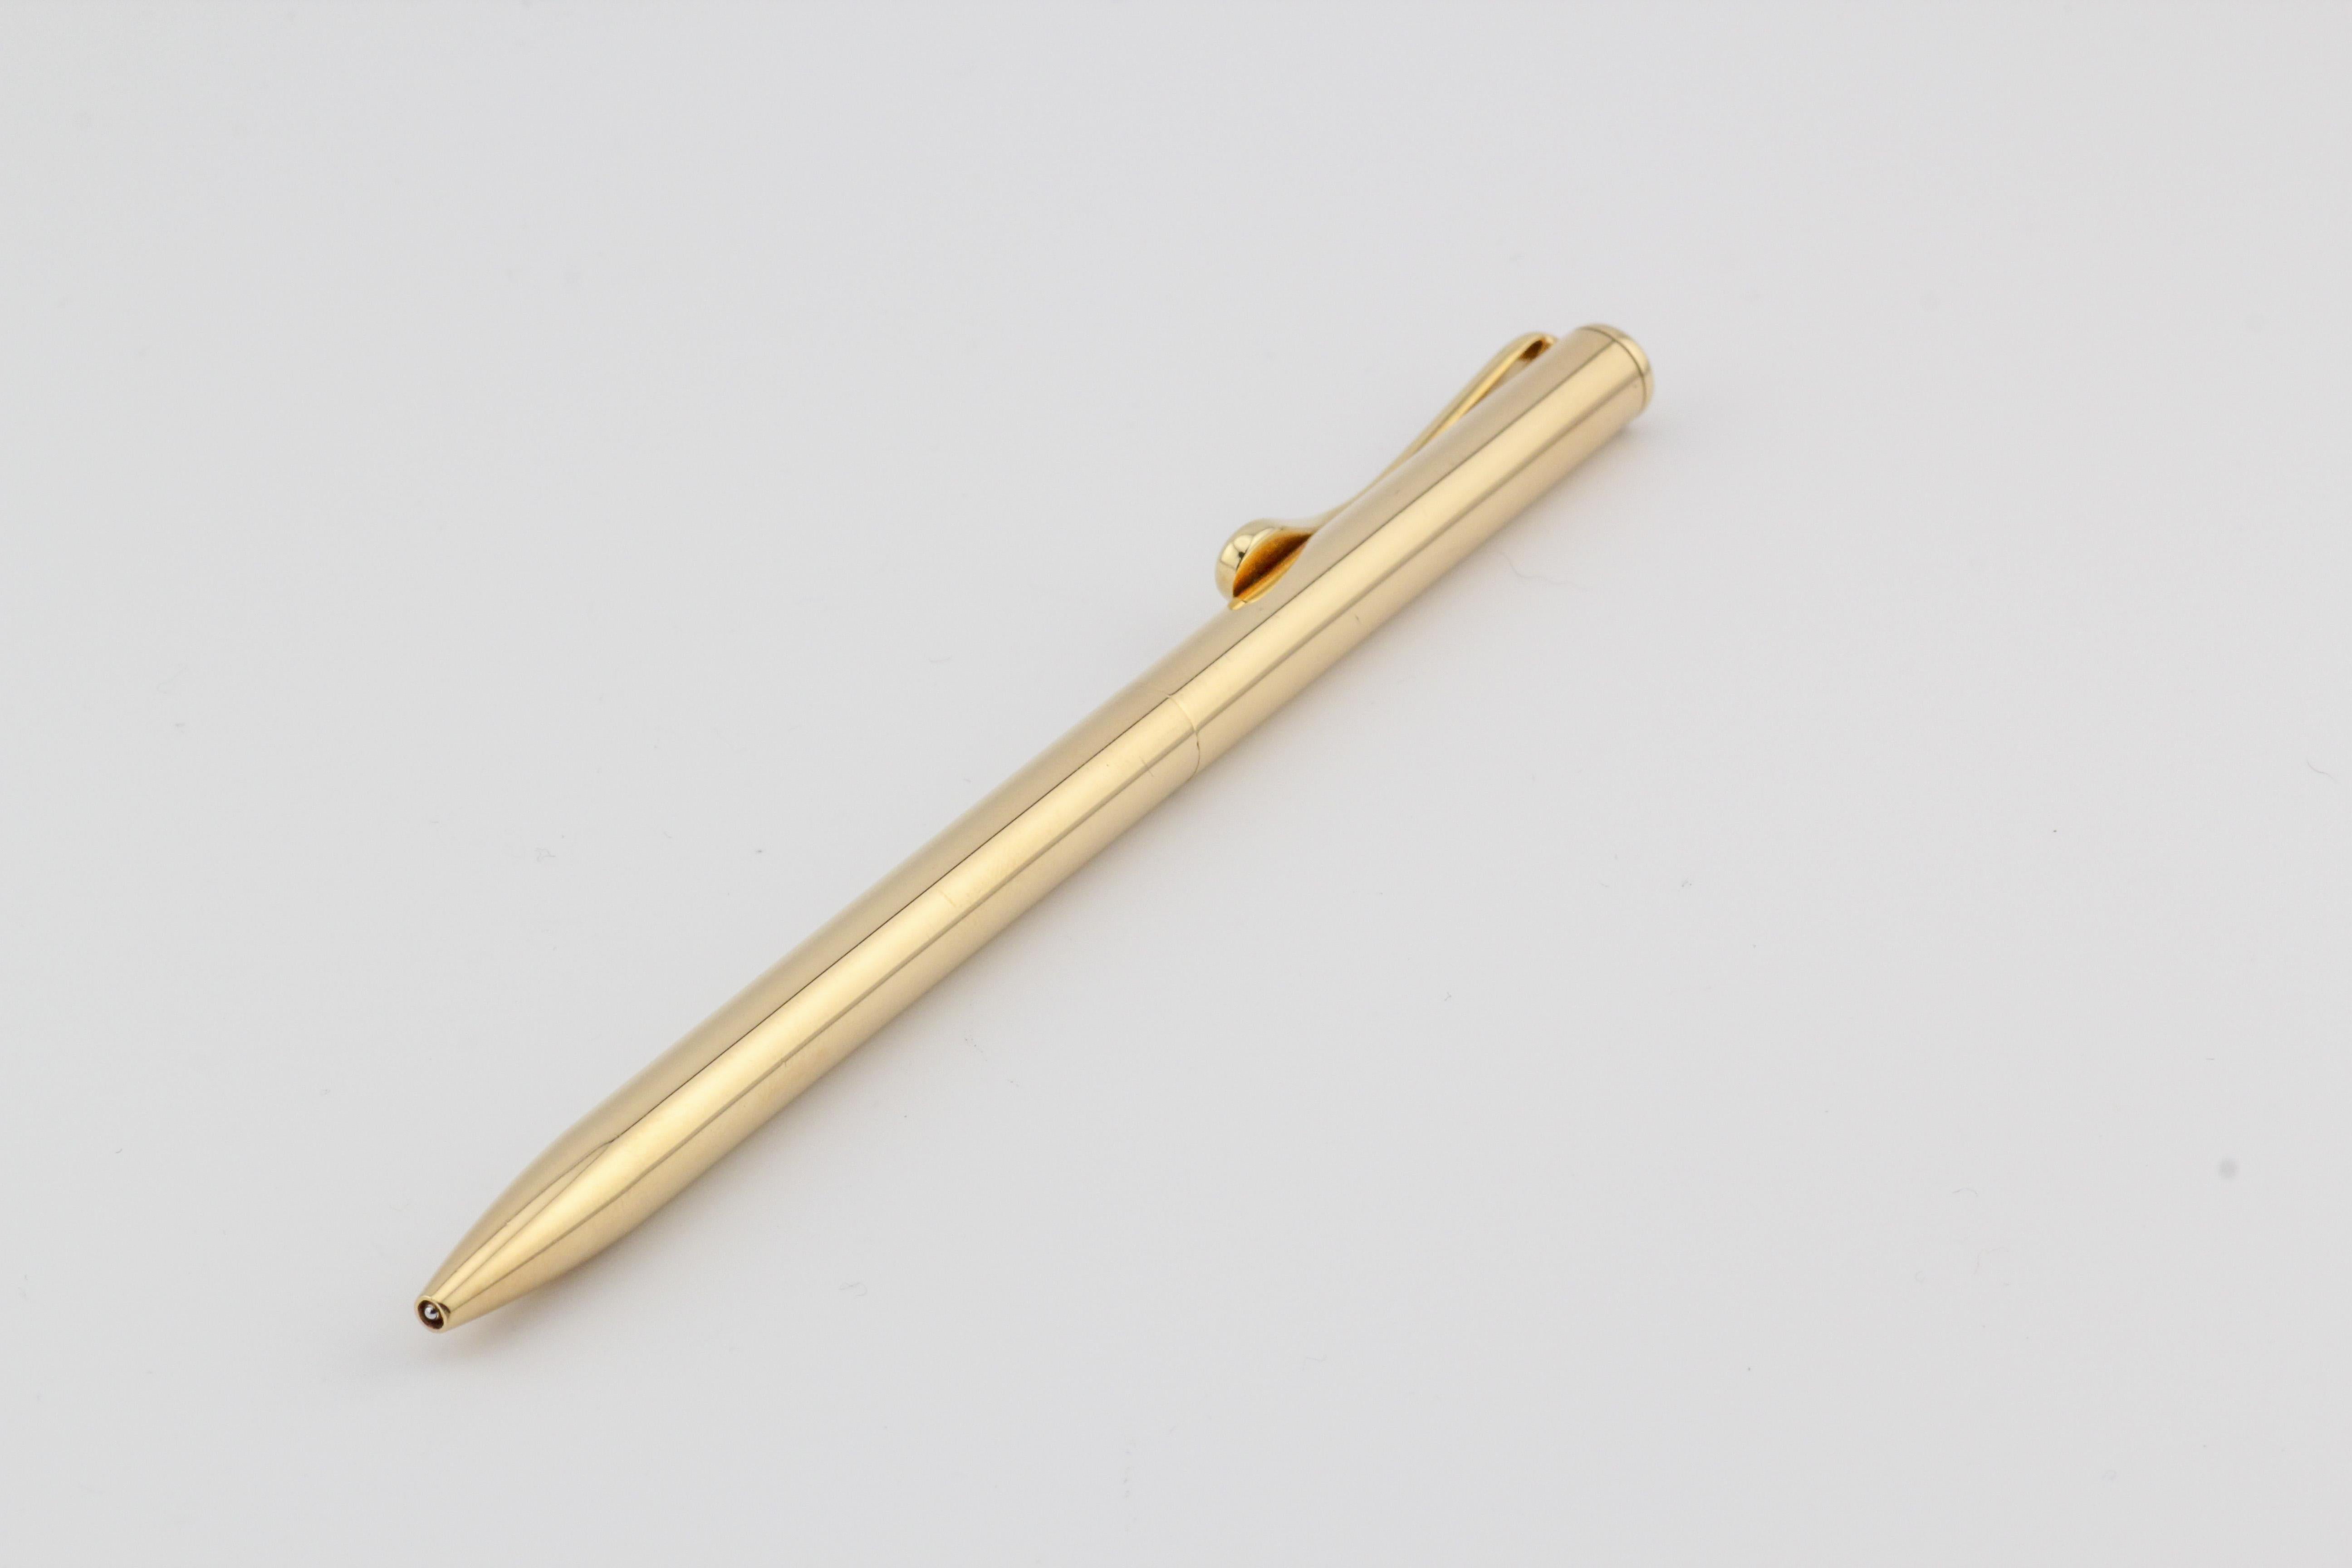 Elegance and functionality converge in this exquisite Tiffany & Co. Elsa Peretti 18k Gold Ballpoint Pen, a testament to the enduring legacy of one of the world's most celebrated designers. Crafted with meticulous attention to detail, this pen is a